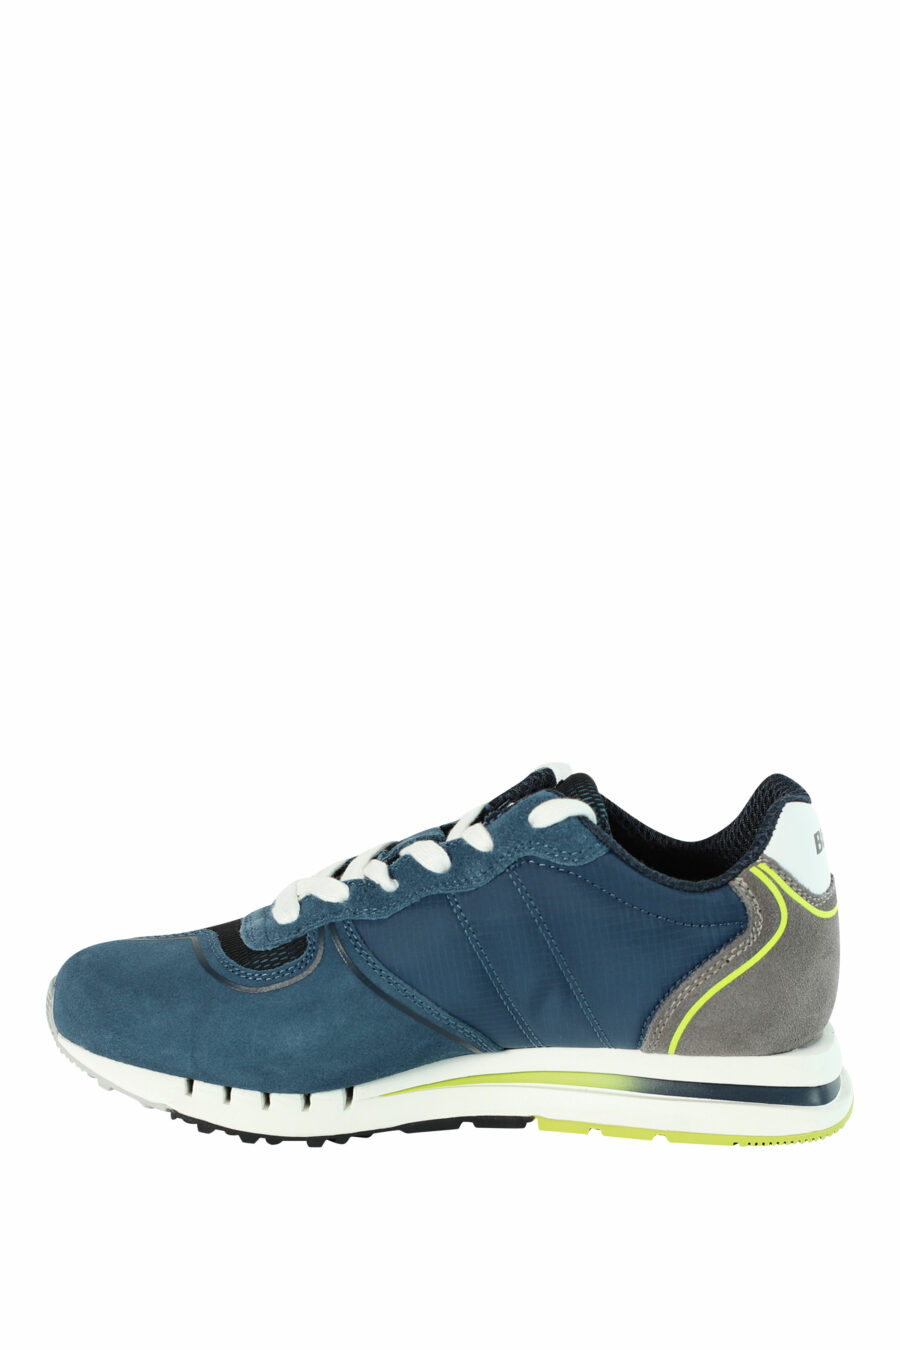 Trainers "QUARTZ" blue with grey and yellow details - 8058156499119 3